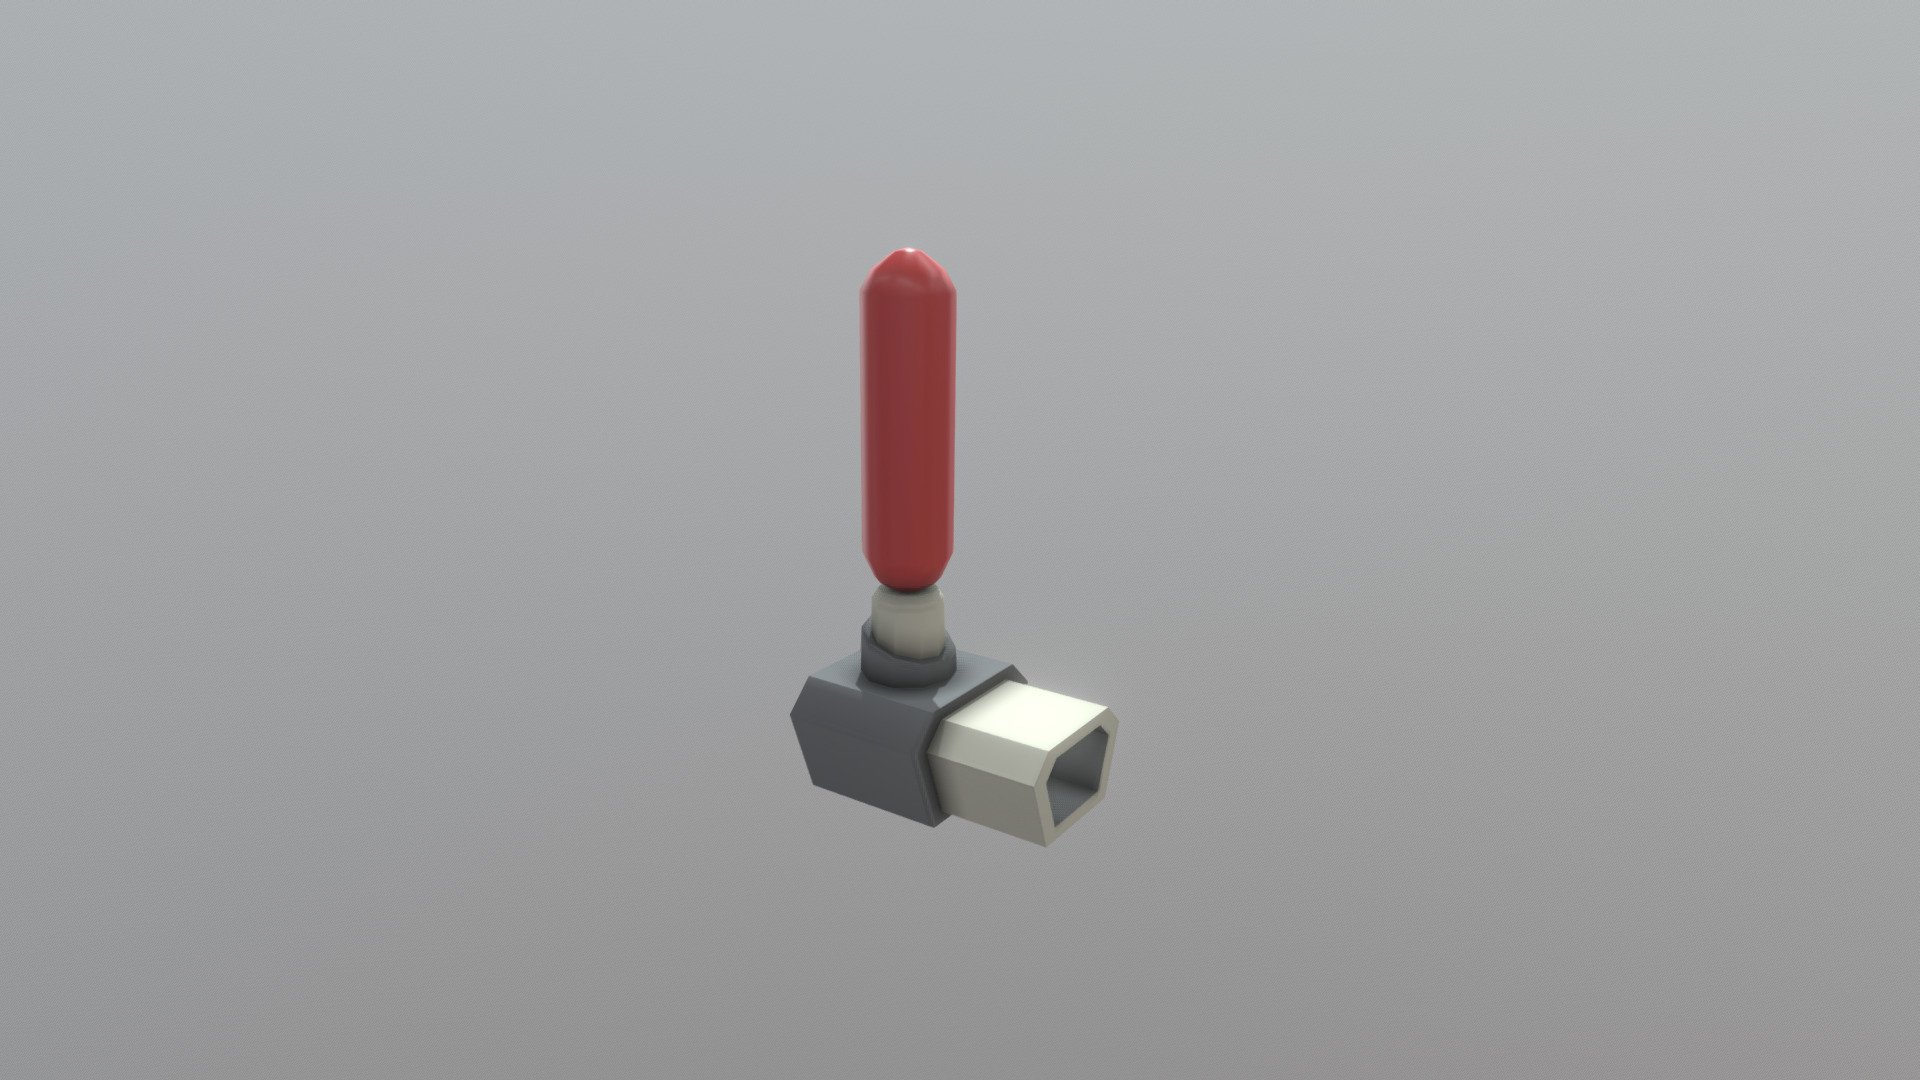 Just a low poly model of the drug Jet from the Fallout series 3d model